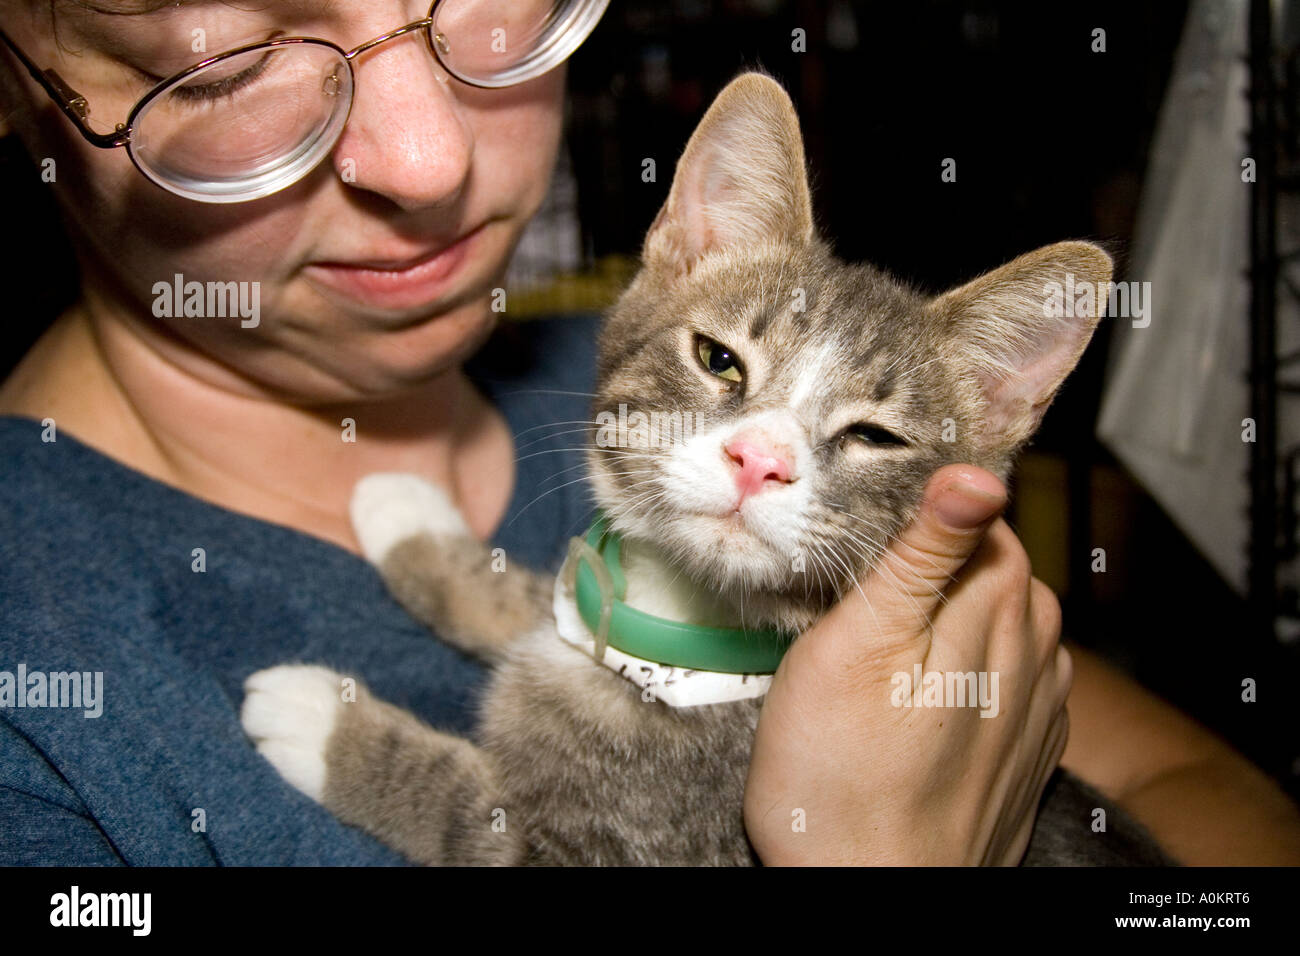 A volunteer holds a cat in an animal shelter during the aftermath of Hurricane Katrina in Slidell Louisiana Stock Photo